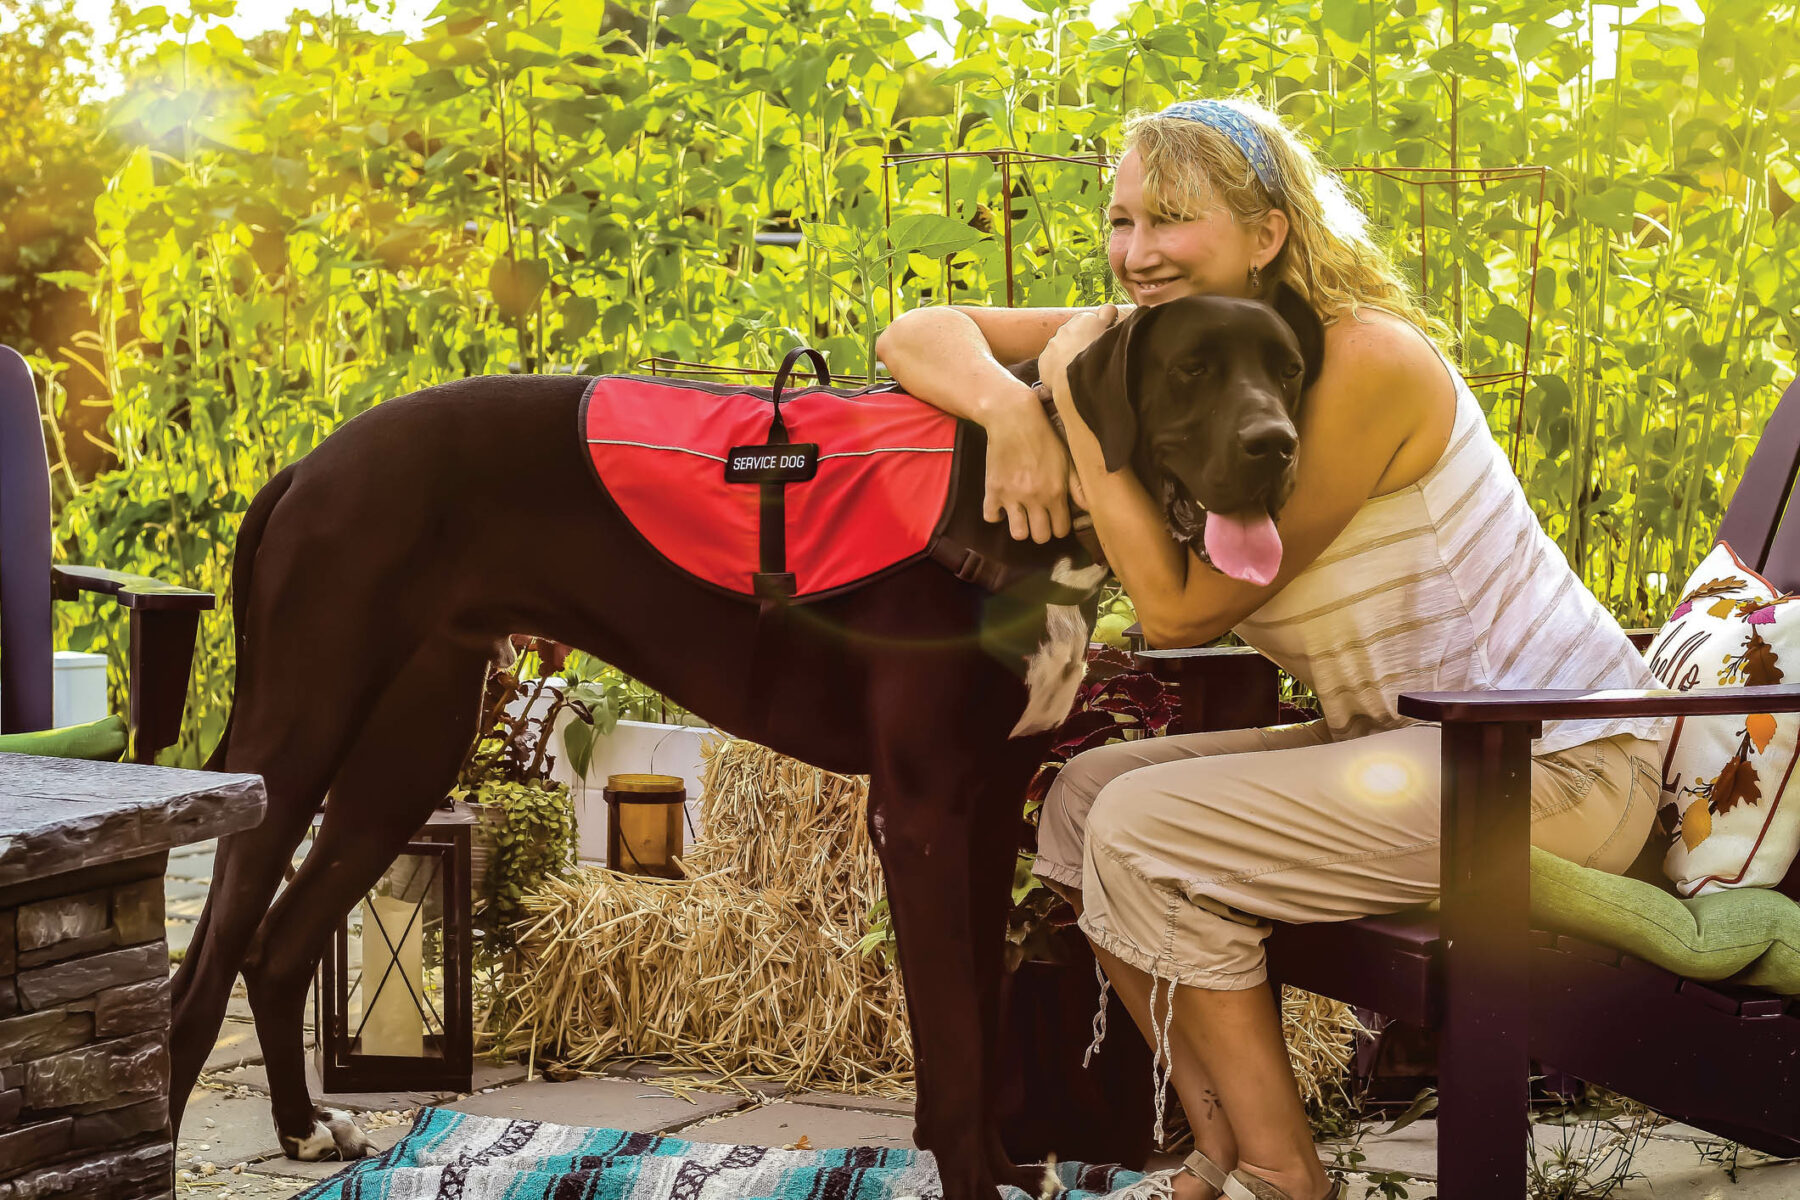 Middle aged woman with mobility issues is able to enjoy her garden patio outdoors with her Great Dane service dog helping her.